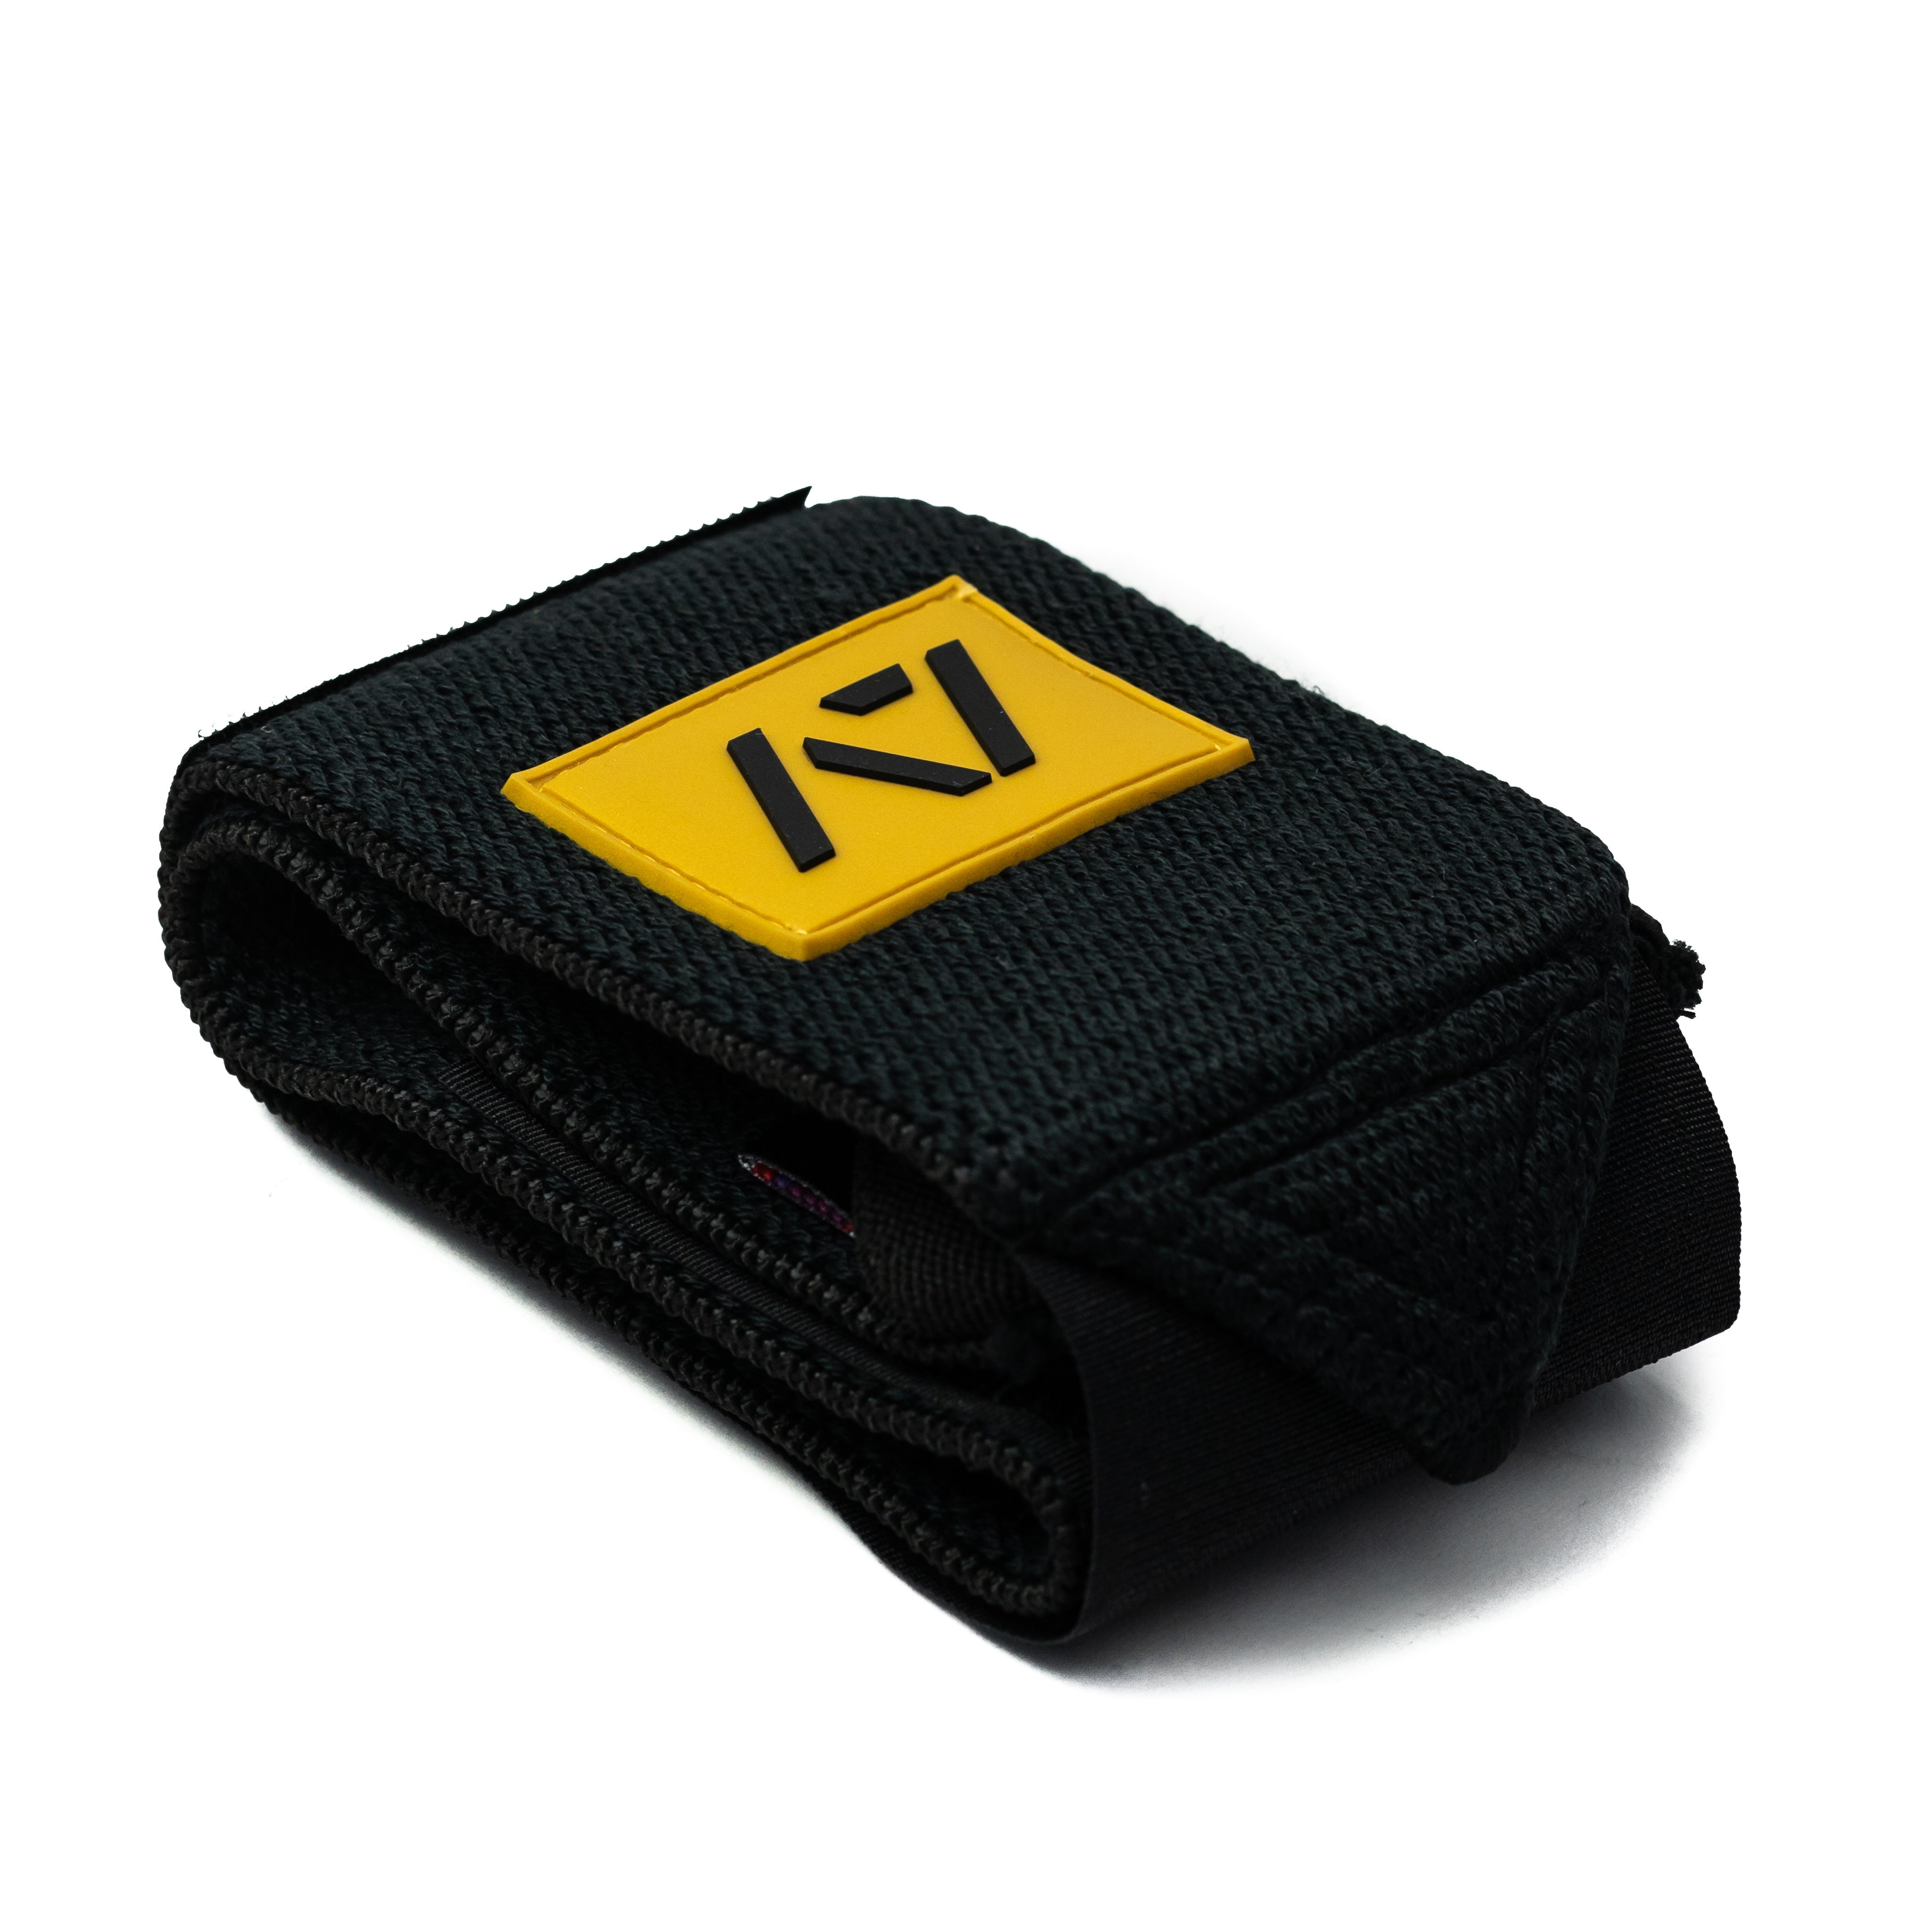 Whether you are benching or squatting, A7 wrist wraps are a perfect addition to your gym bag and IPF approved kit. These wraps feature double thumb loops so you don't ever have to worry about which way you have to put them on. We offer these wrist wraps in 3 sizes : 55 cm, 77 cm and 99 cm.

A7 Wrist Wraps are IPF approved. 